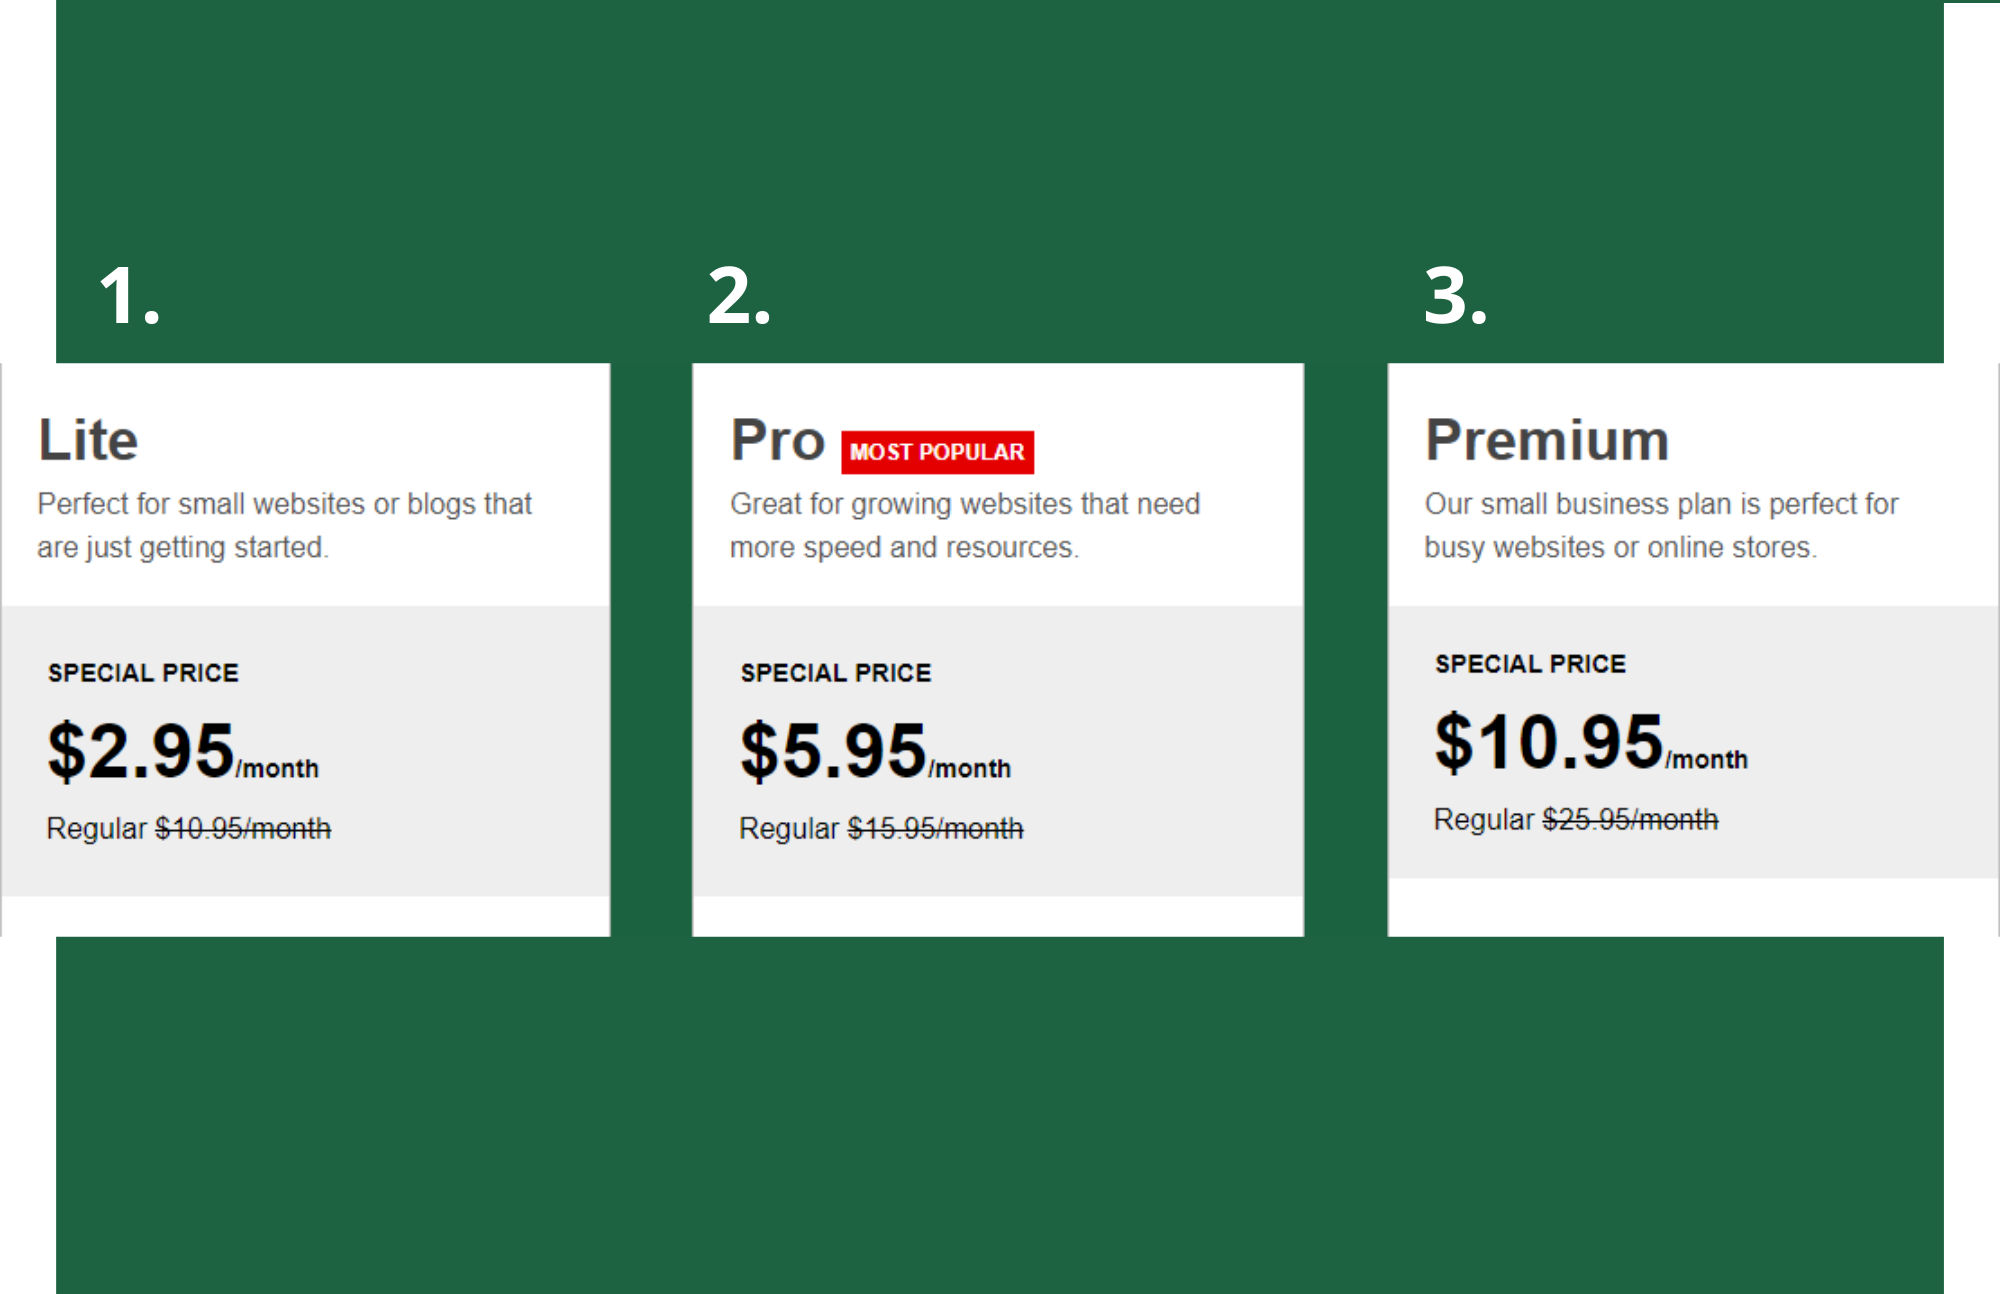 The three levels of pricing of offer which are the Lite, Pro, and Premium